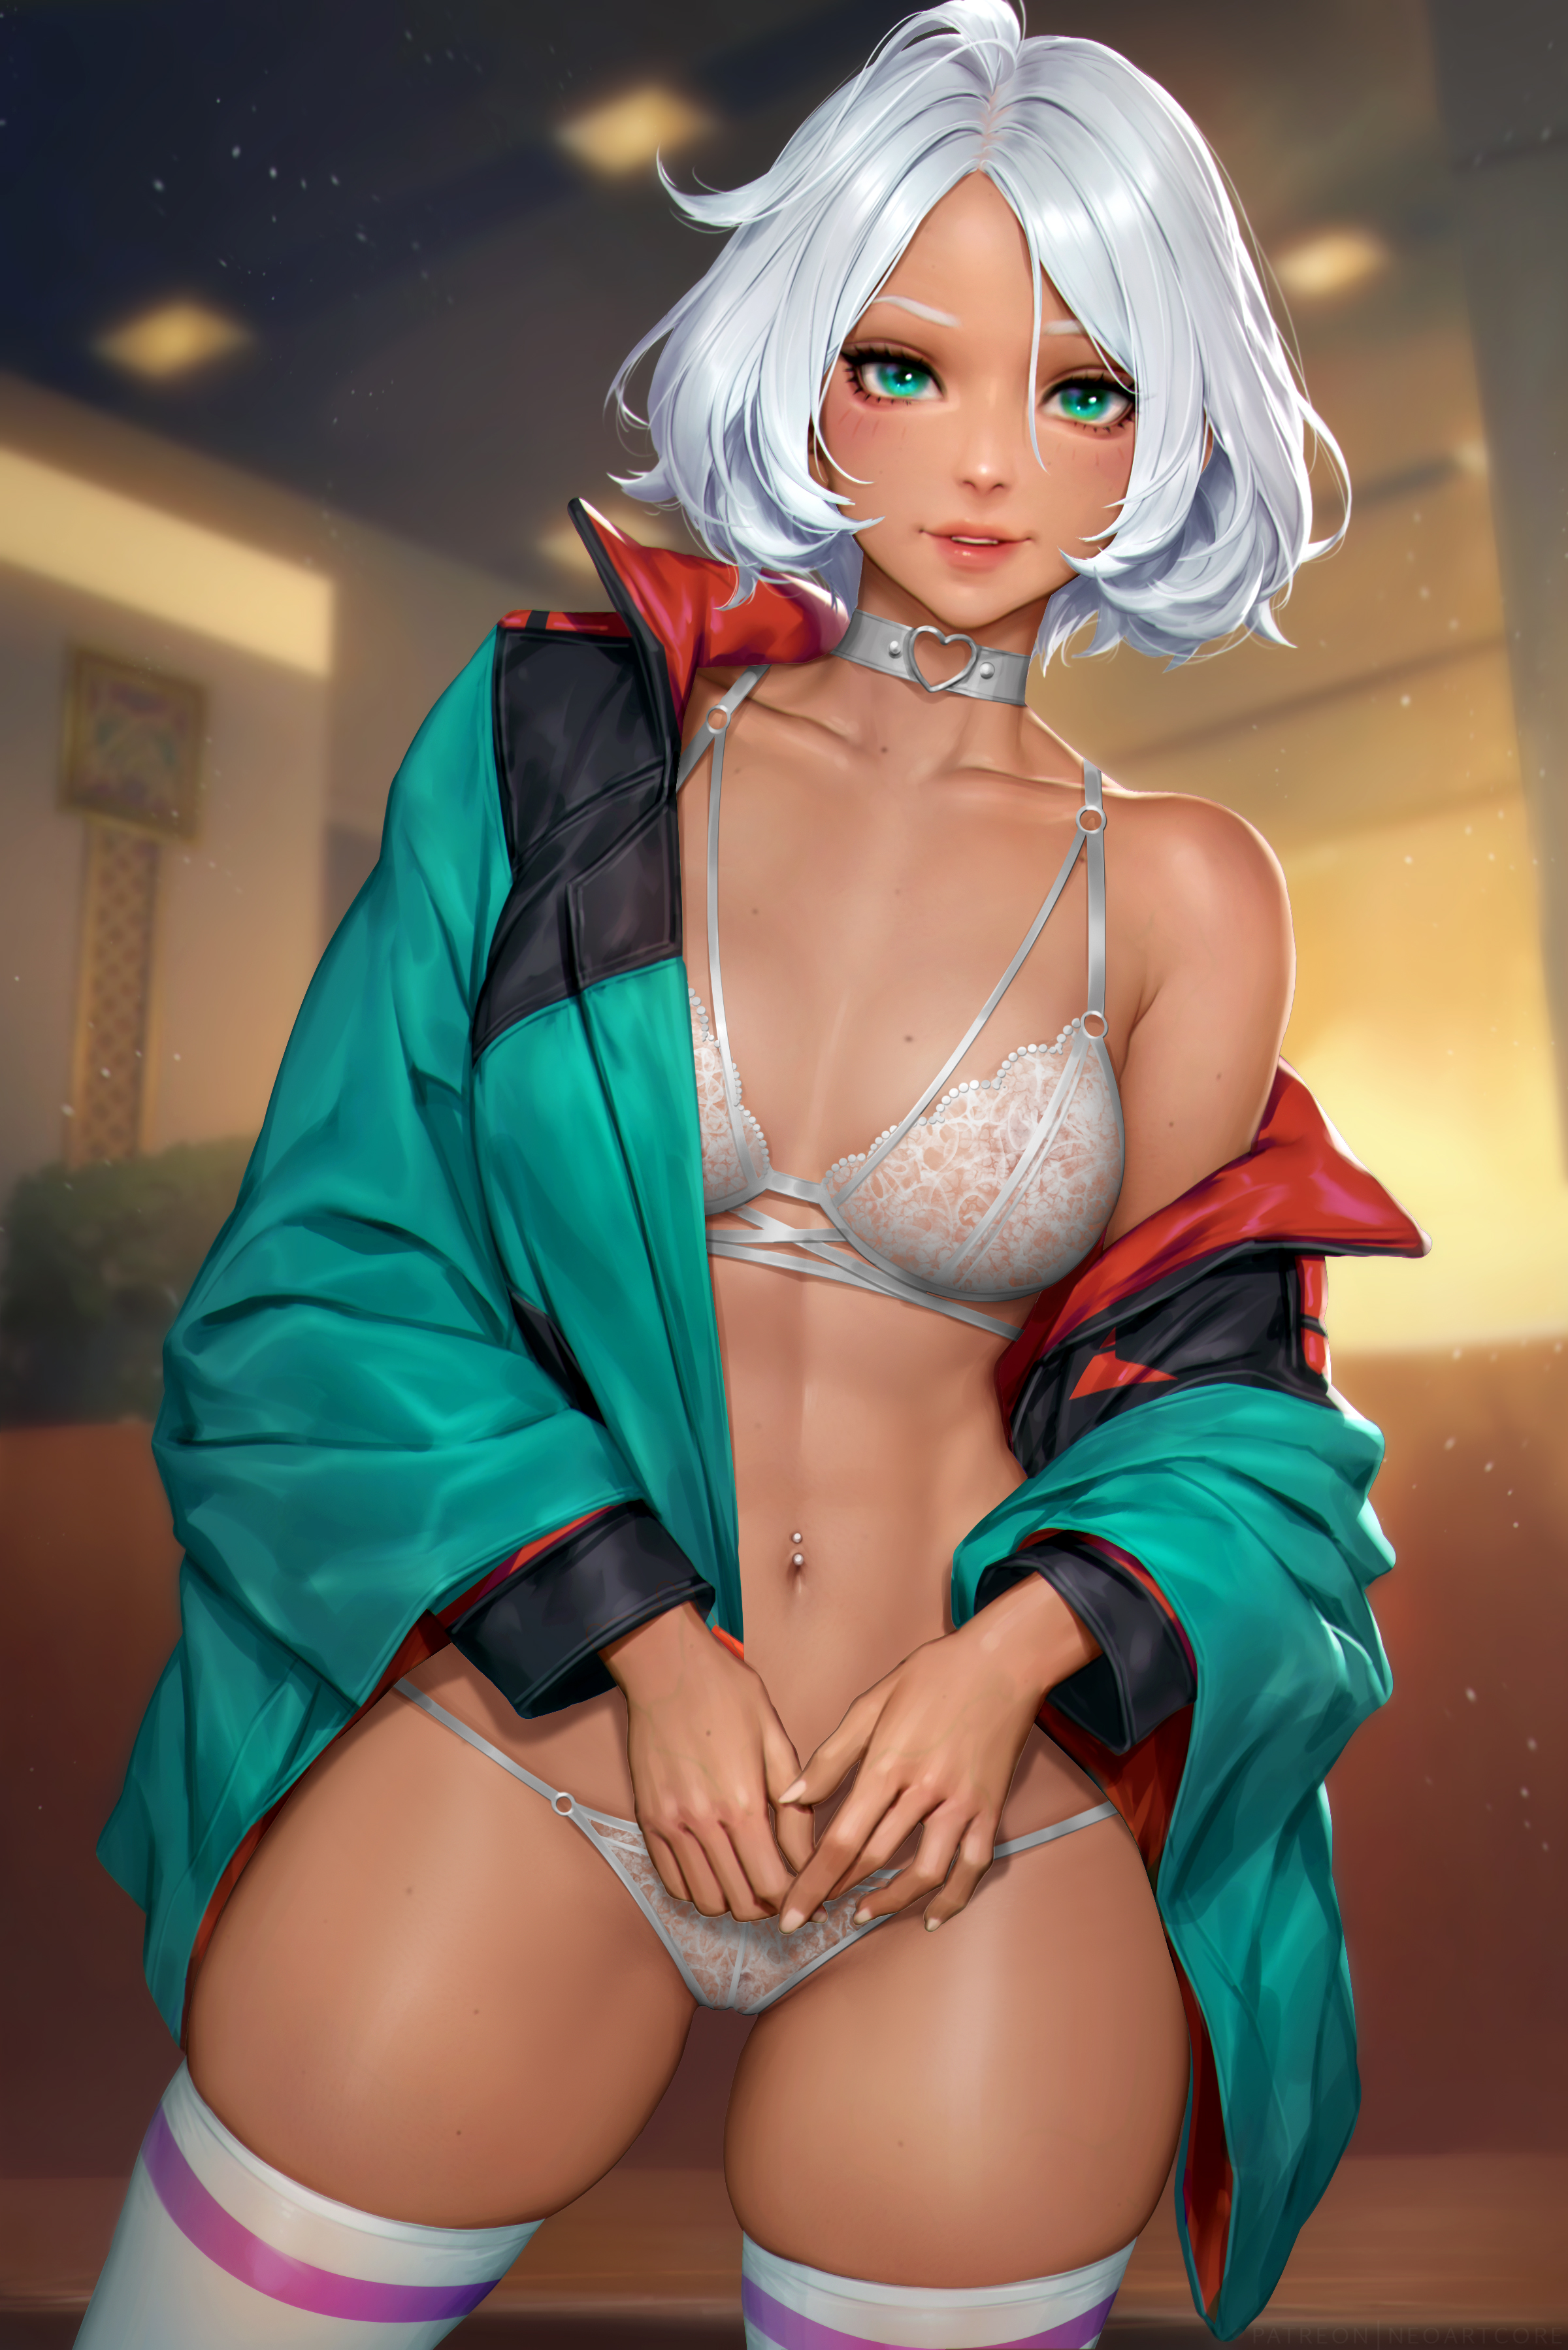 Anime 2400x3597 Secelia Dote Mobile Suit Gundam: The Witch from Mercury anime anime girls artwork drawing fan art NeoArtCorE (artist) underwear lingerie white lingerie thigh high socks choker standing portrait display looking at viewer short hair dark skin